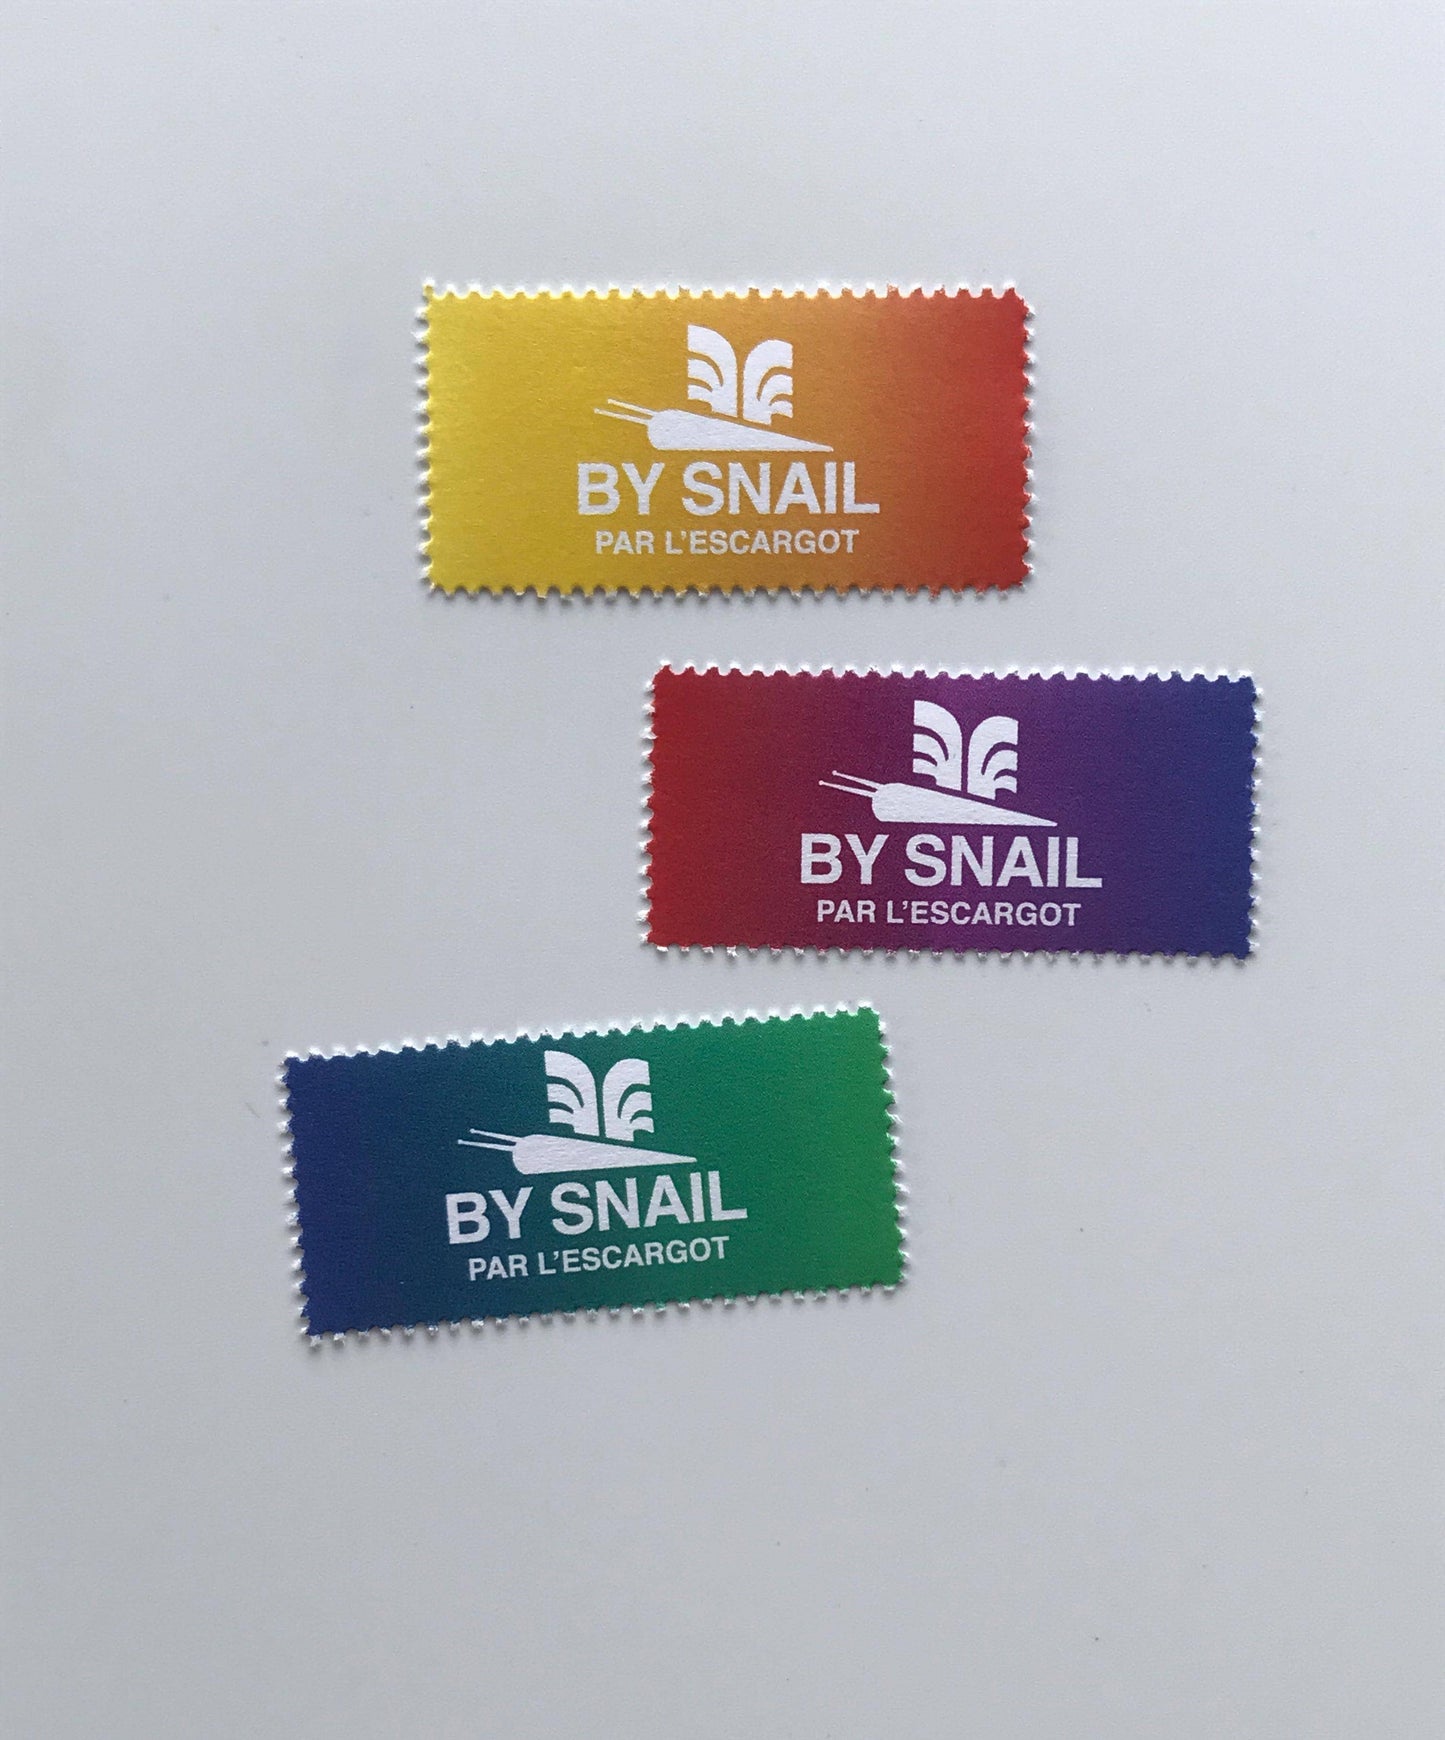 The Portland Stamp Company - By Snail Lick & Stick Stamps - 3-pack (gradients)